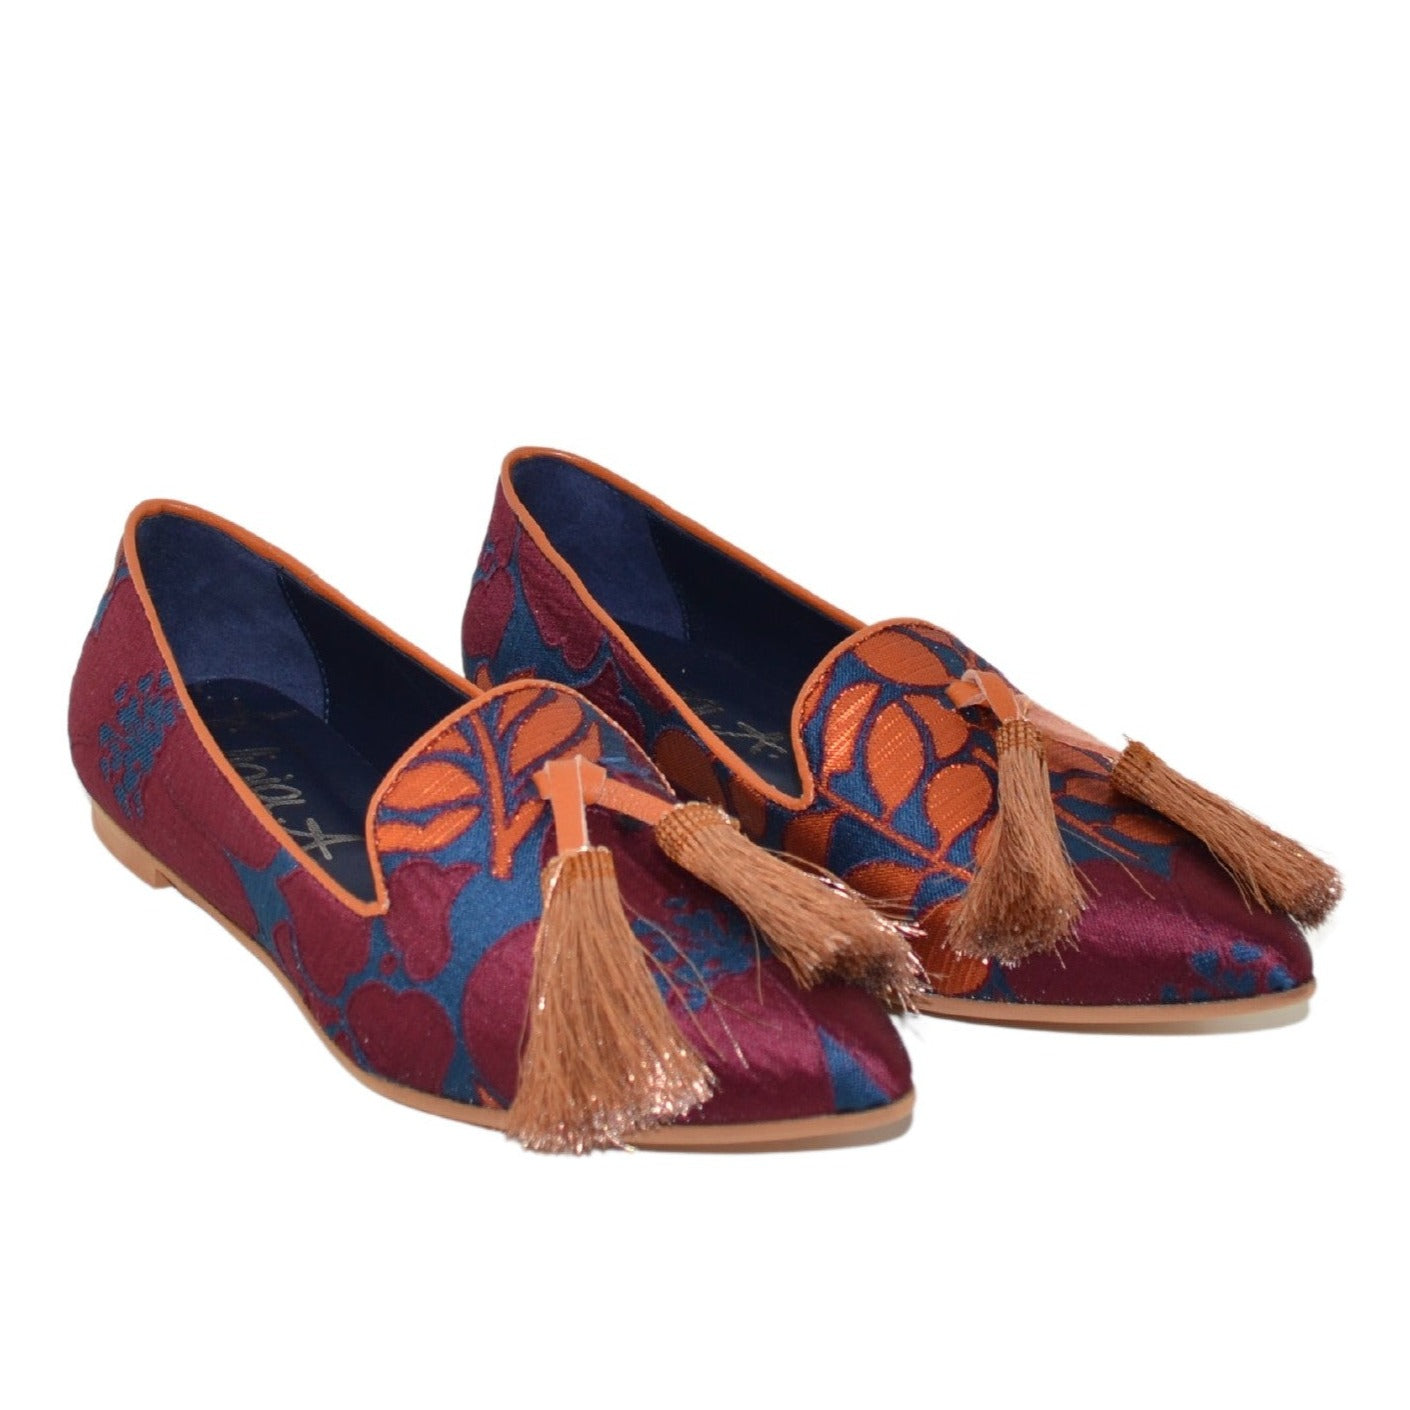 Loafer woman orange pattern colored fabric